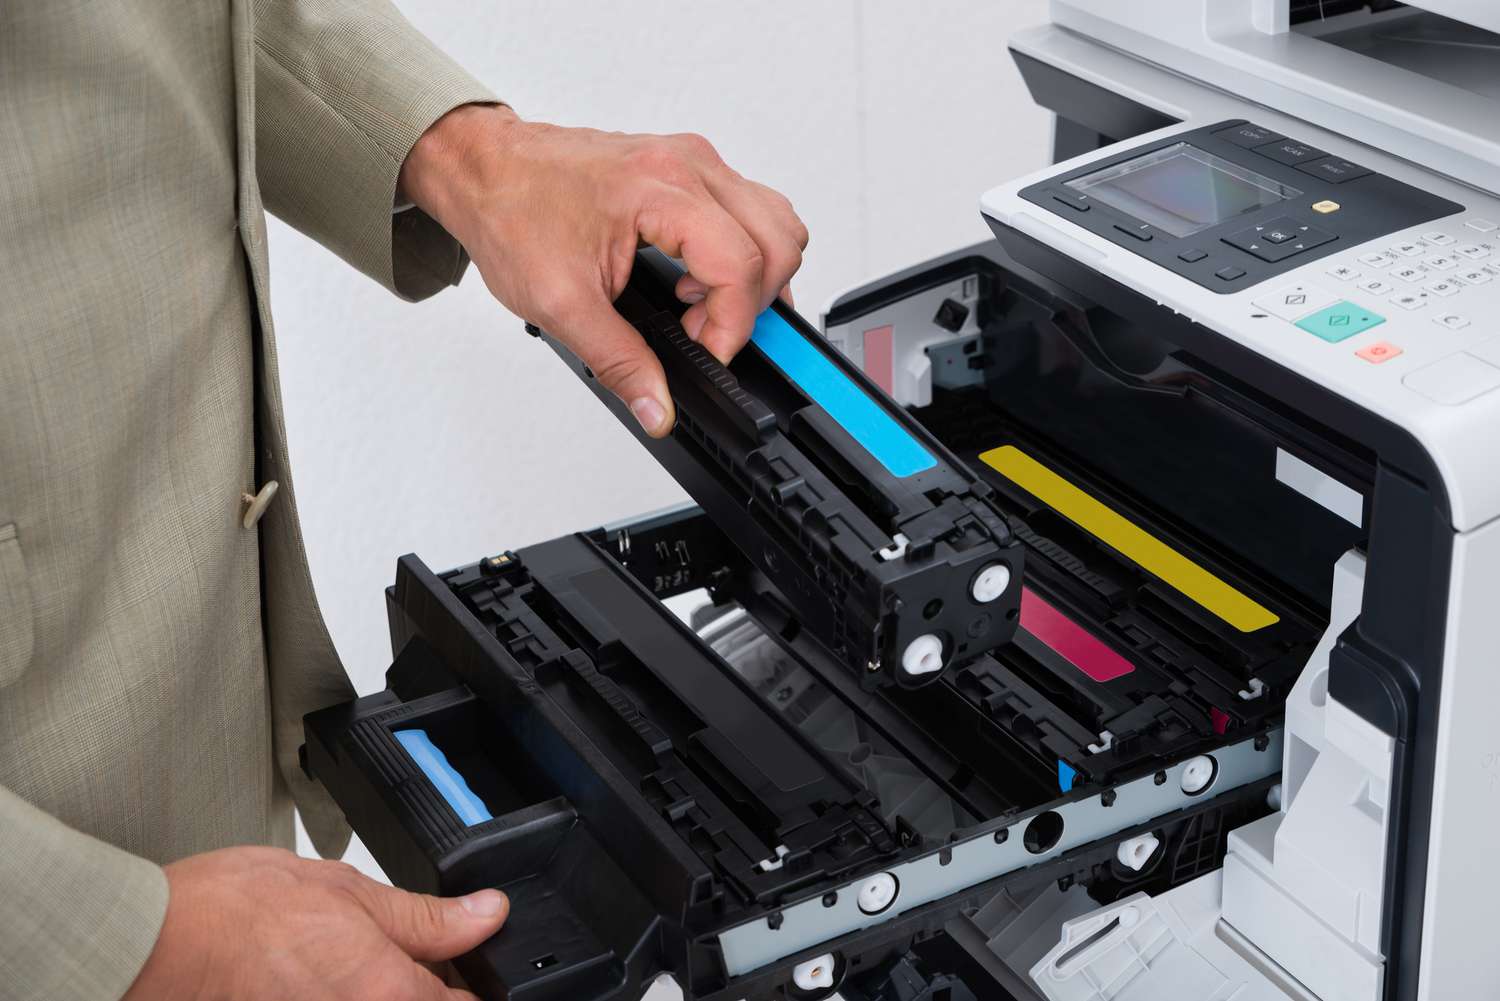 How To Install An HP Printer Ink